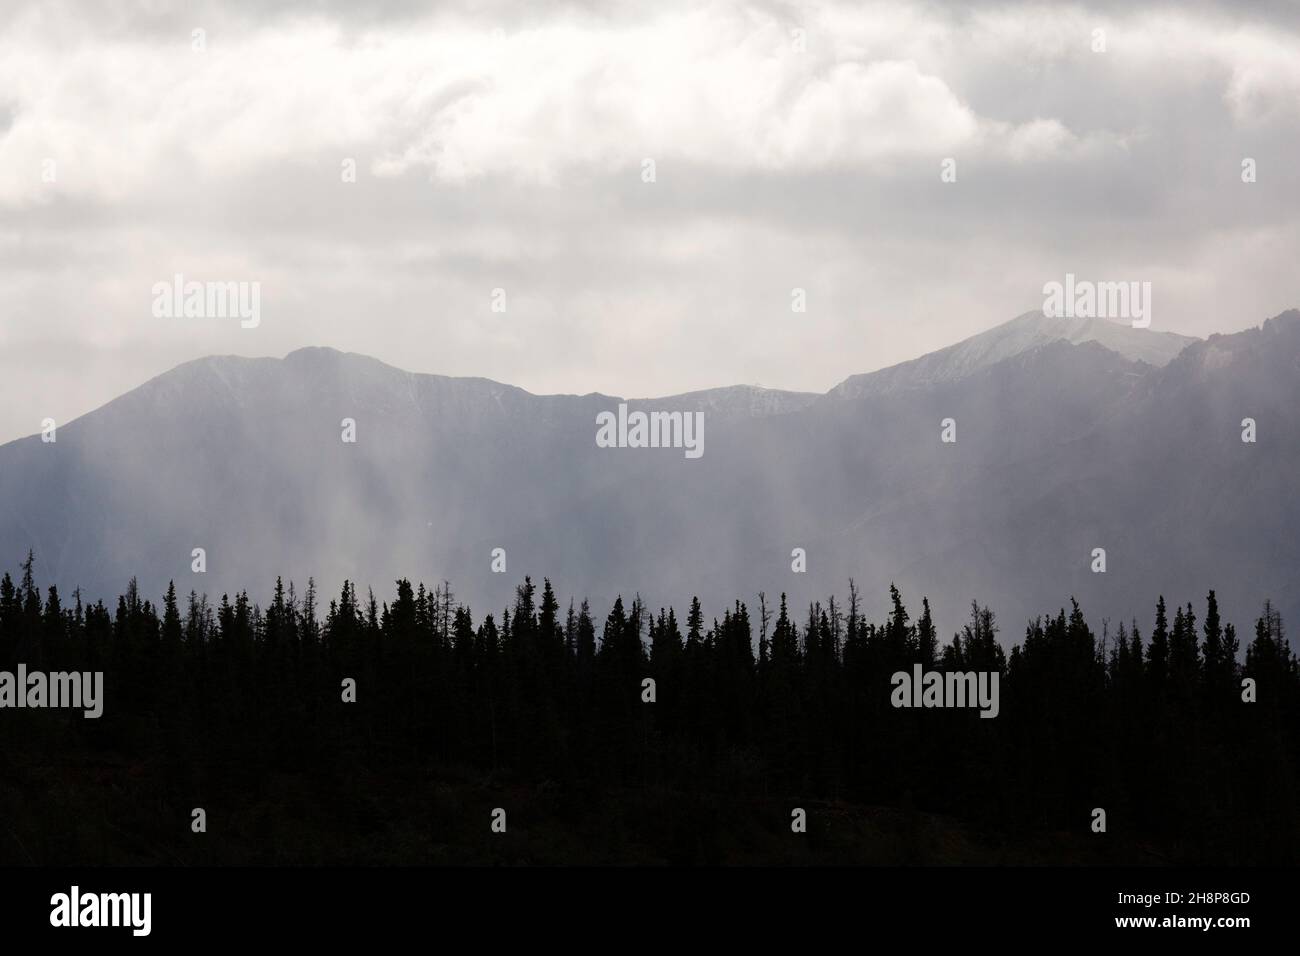 Mountains rise above dense forest in Kluane National Park and Reserve in the Yukon, Canada. Stock Photo